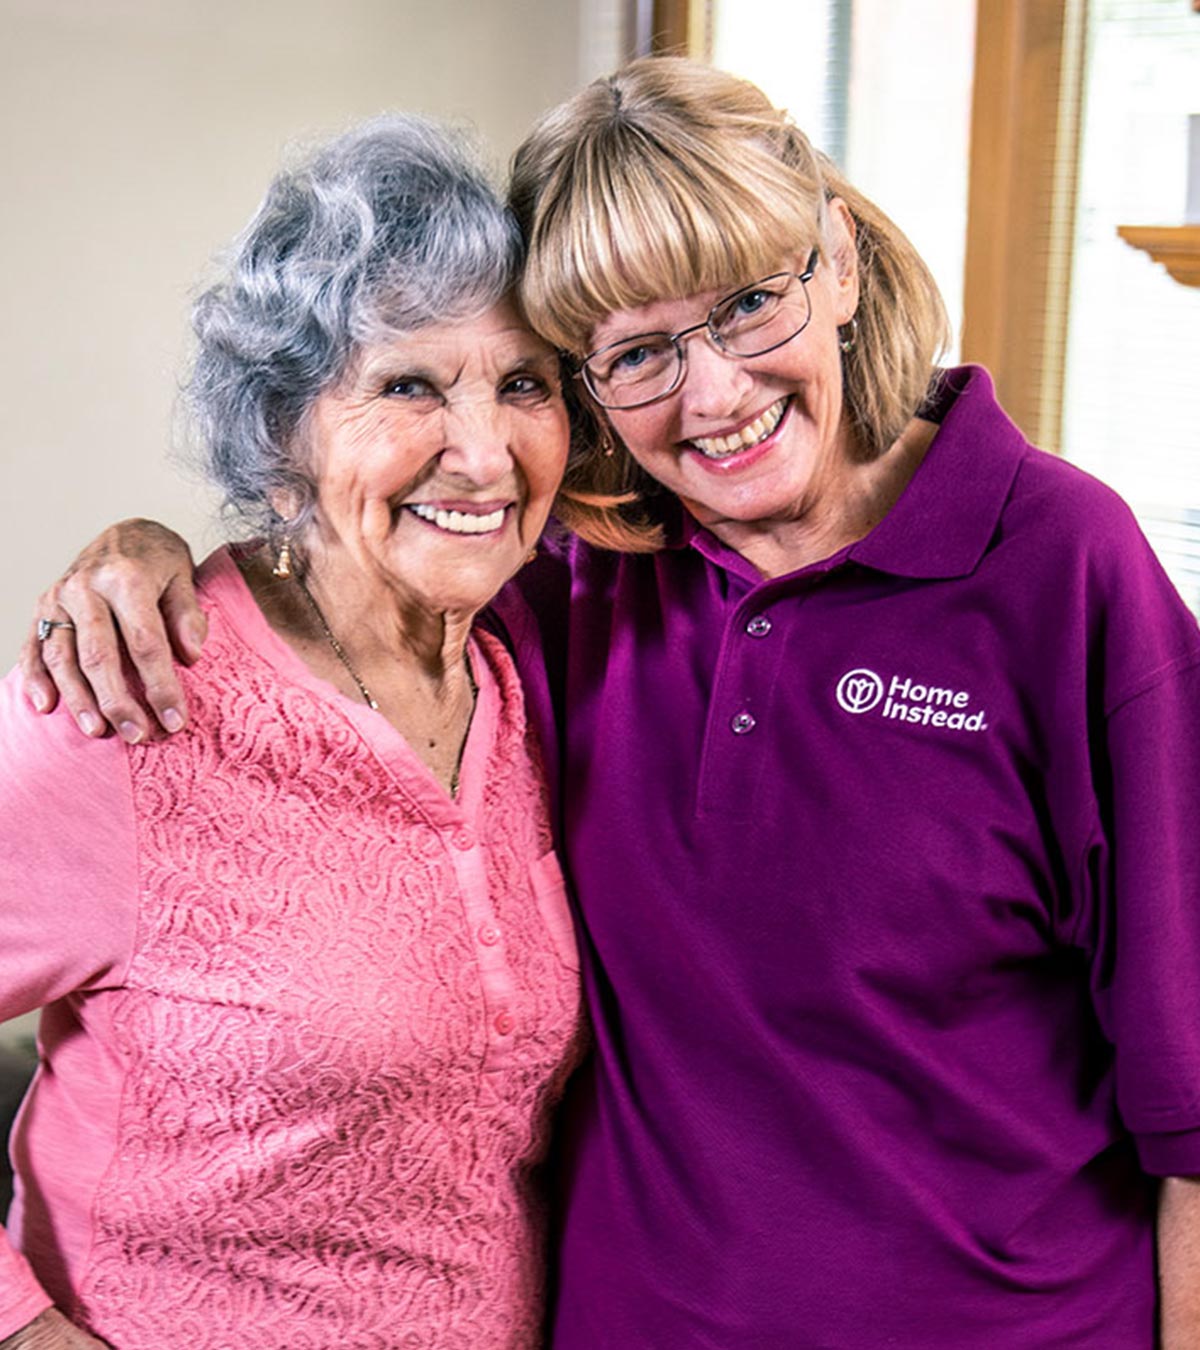 Home Instead Caregiver and senior woman with cane stand smiling together at home.